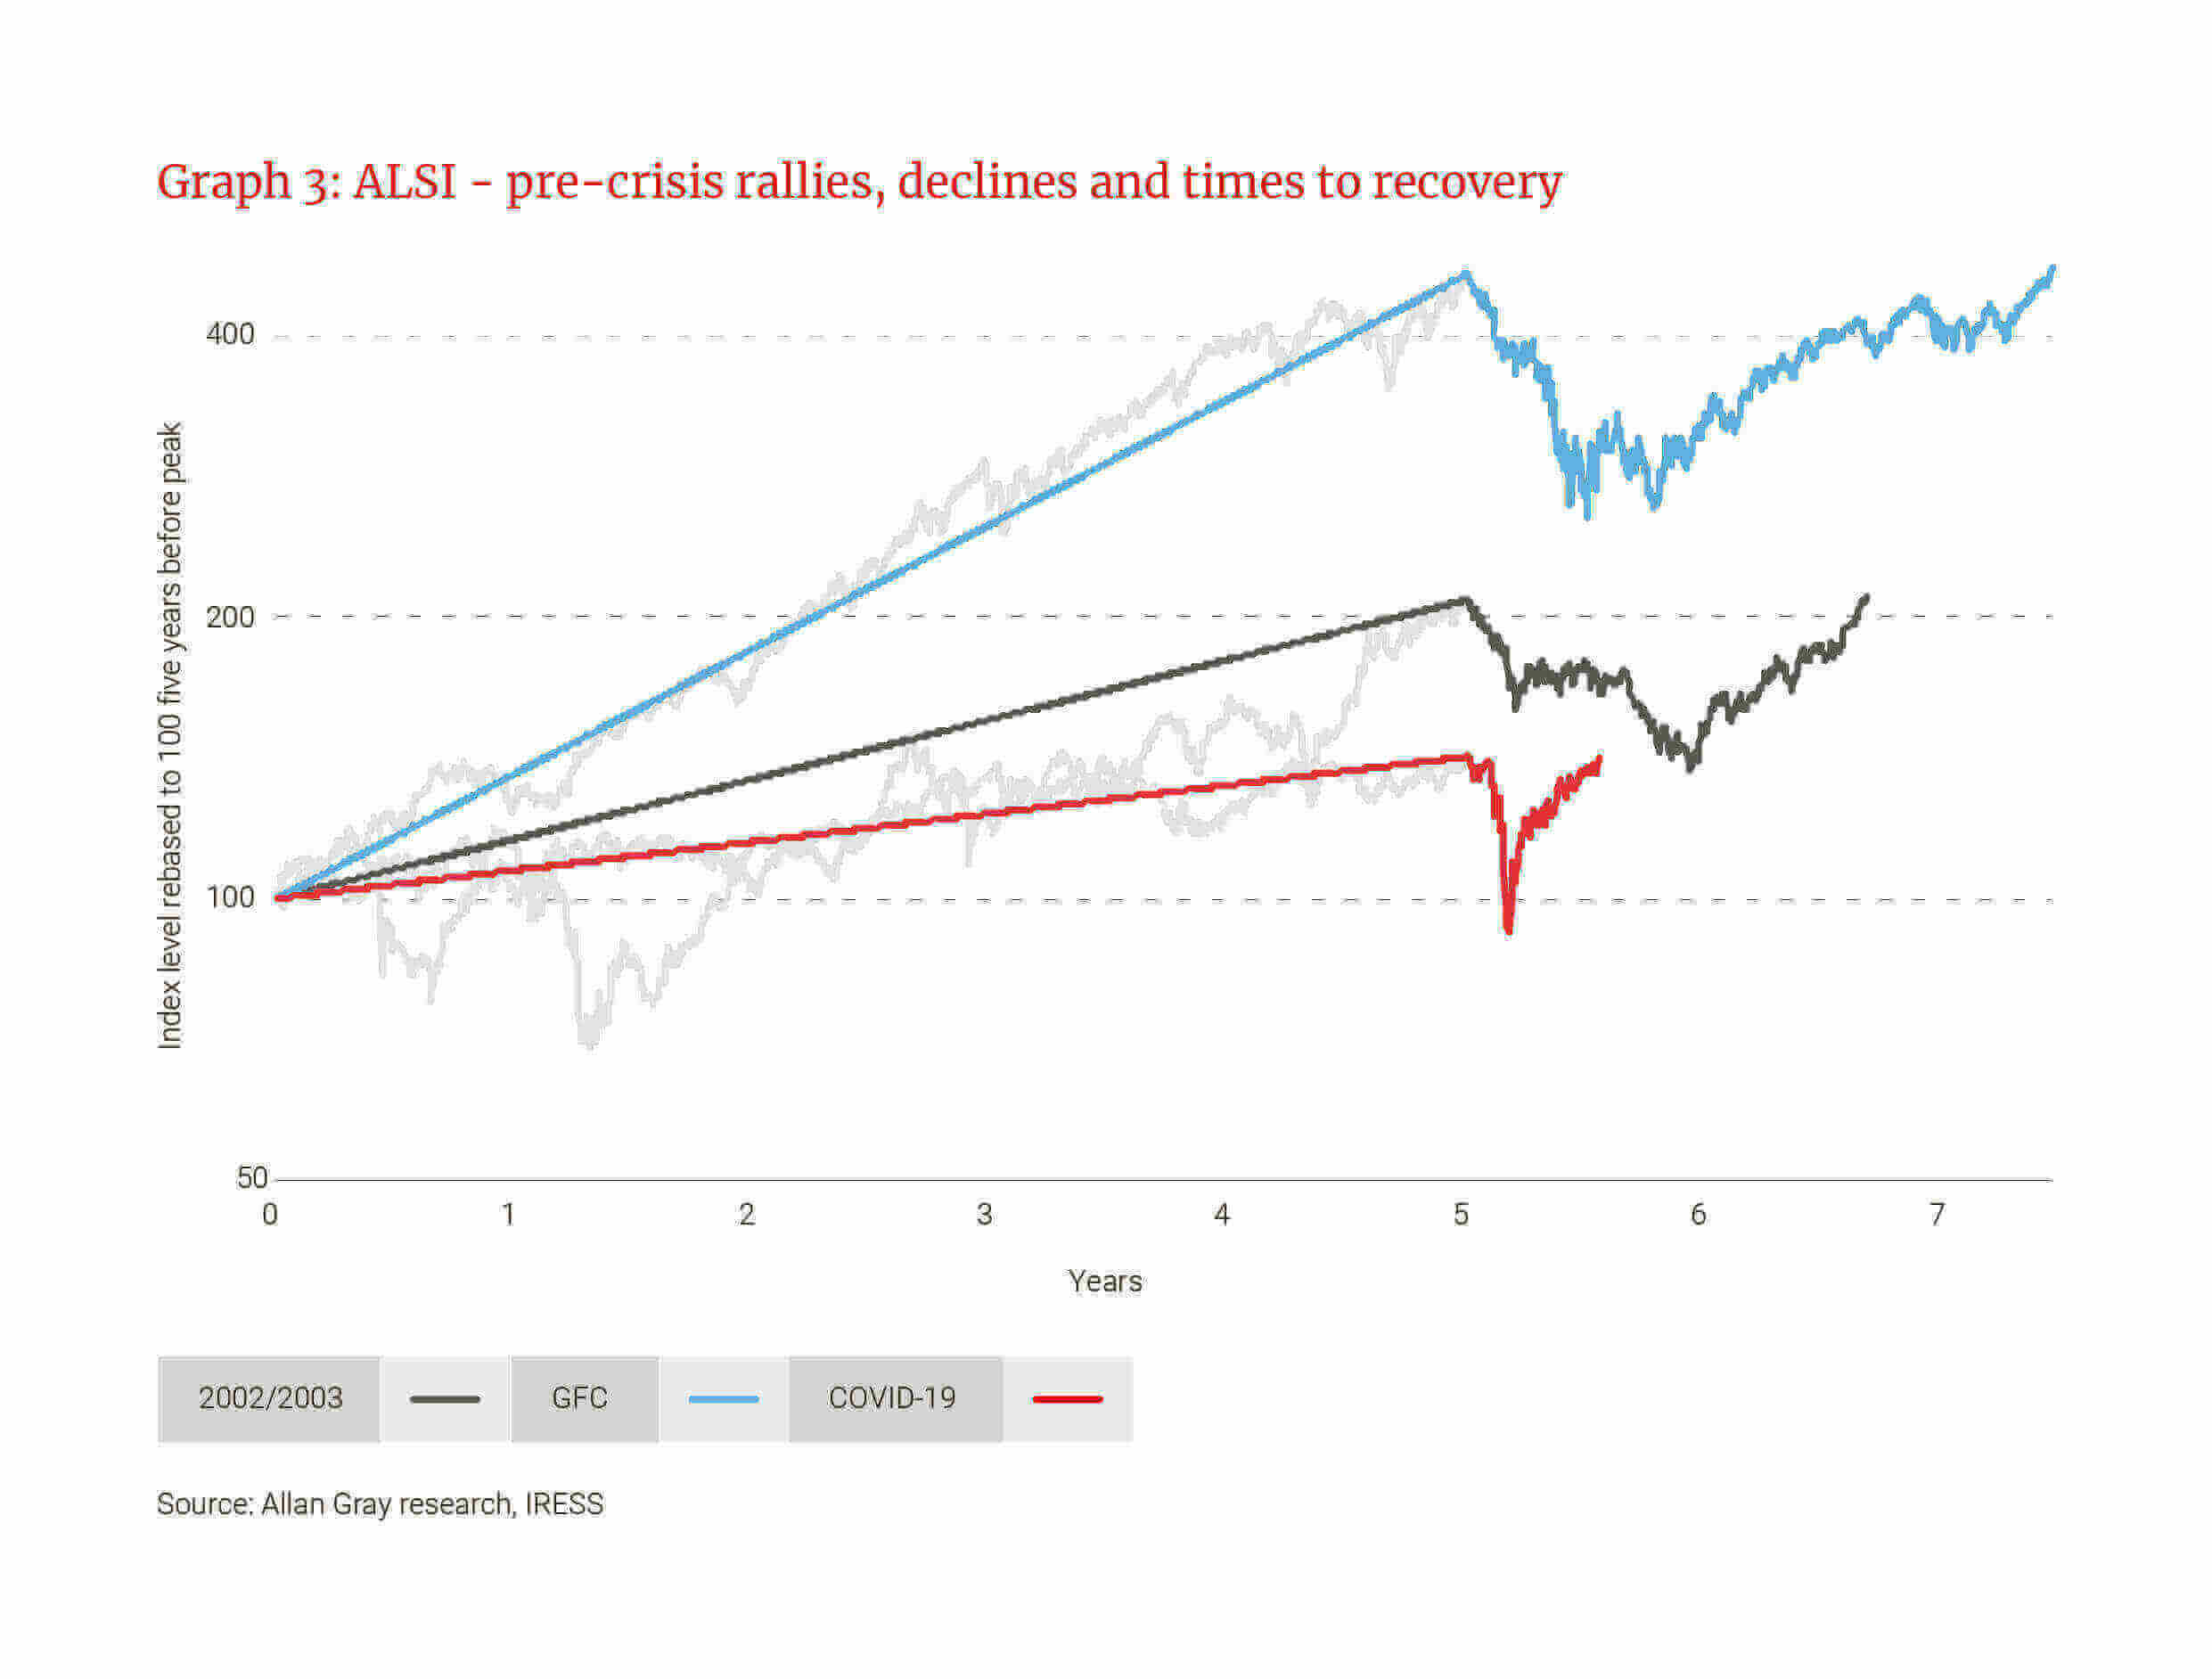 ALSI - Pre-crisis rallies, declines and times to recovery - Allan Gray